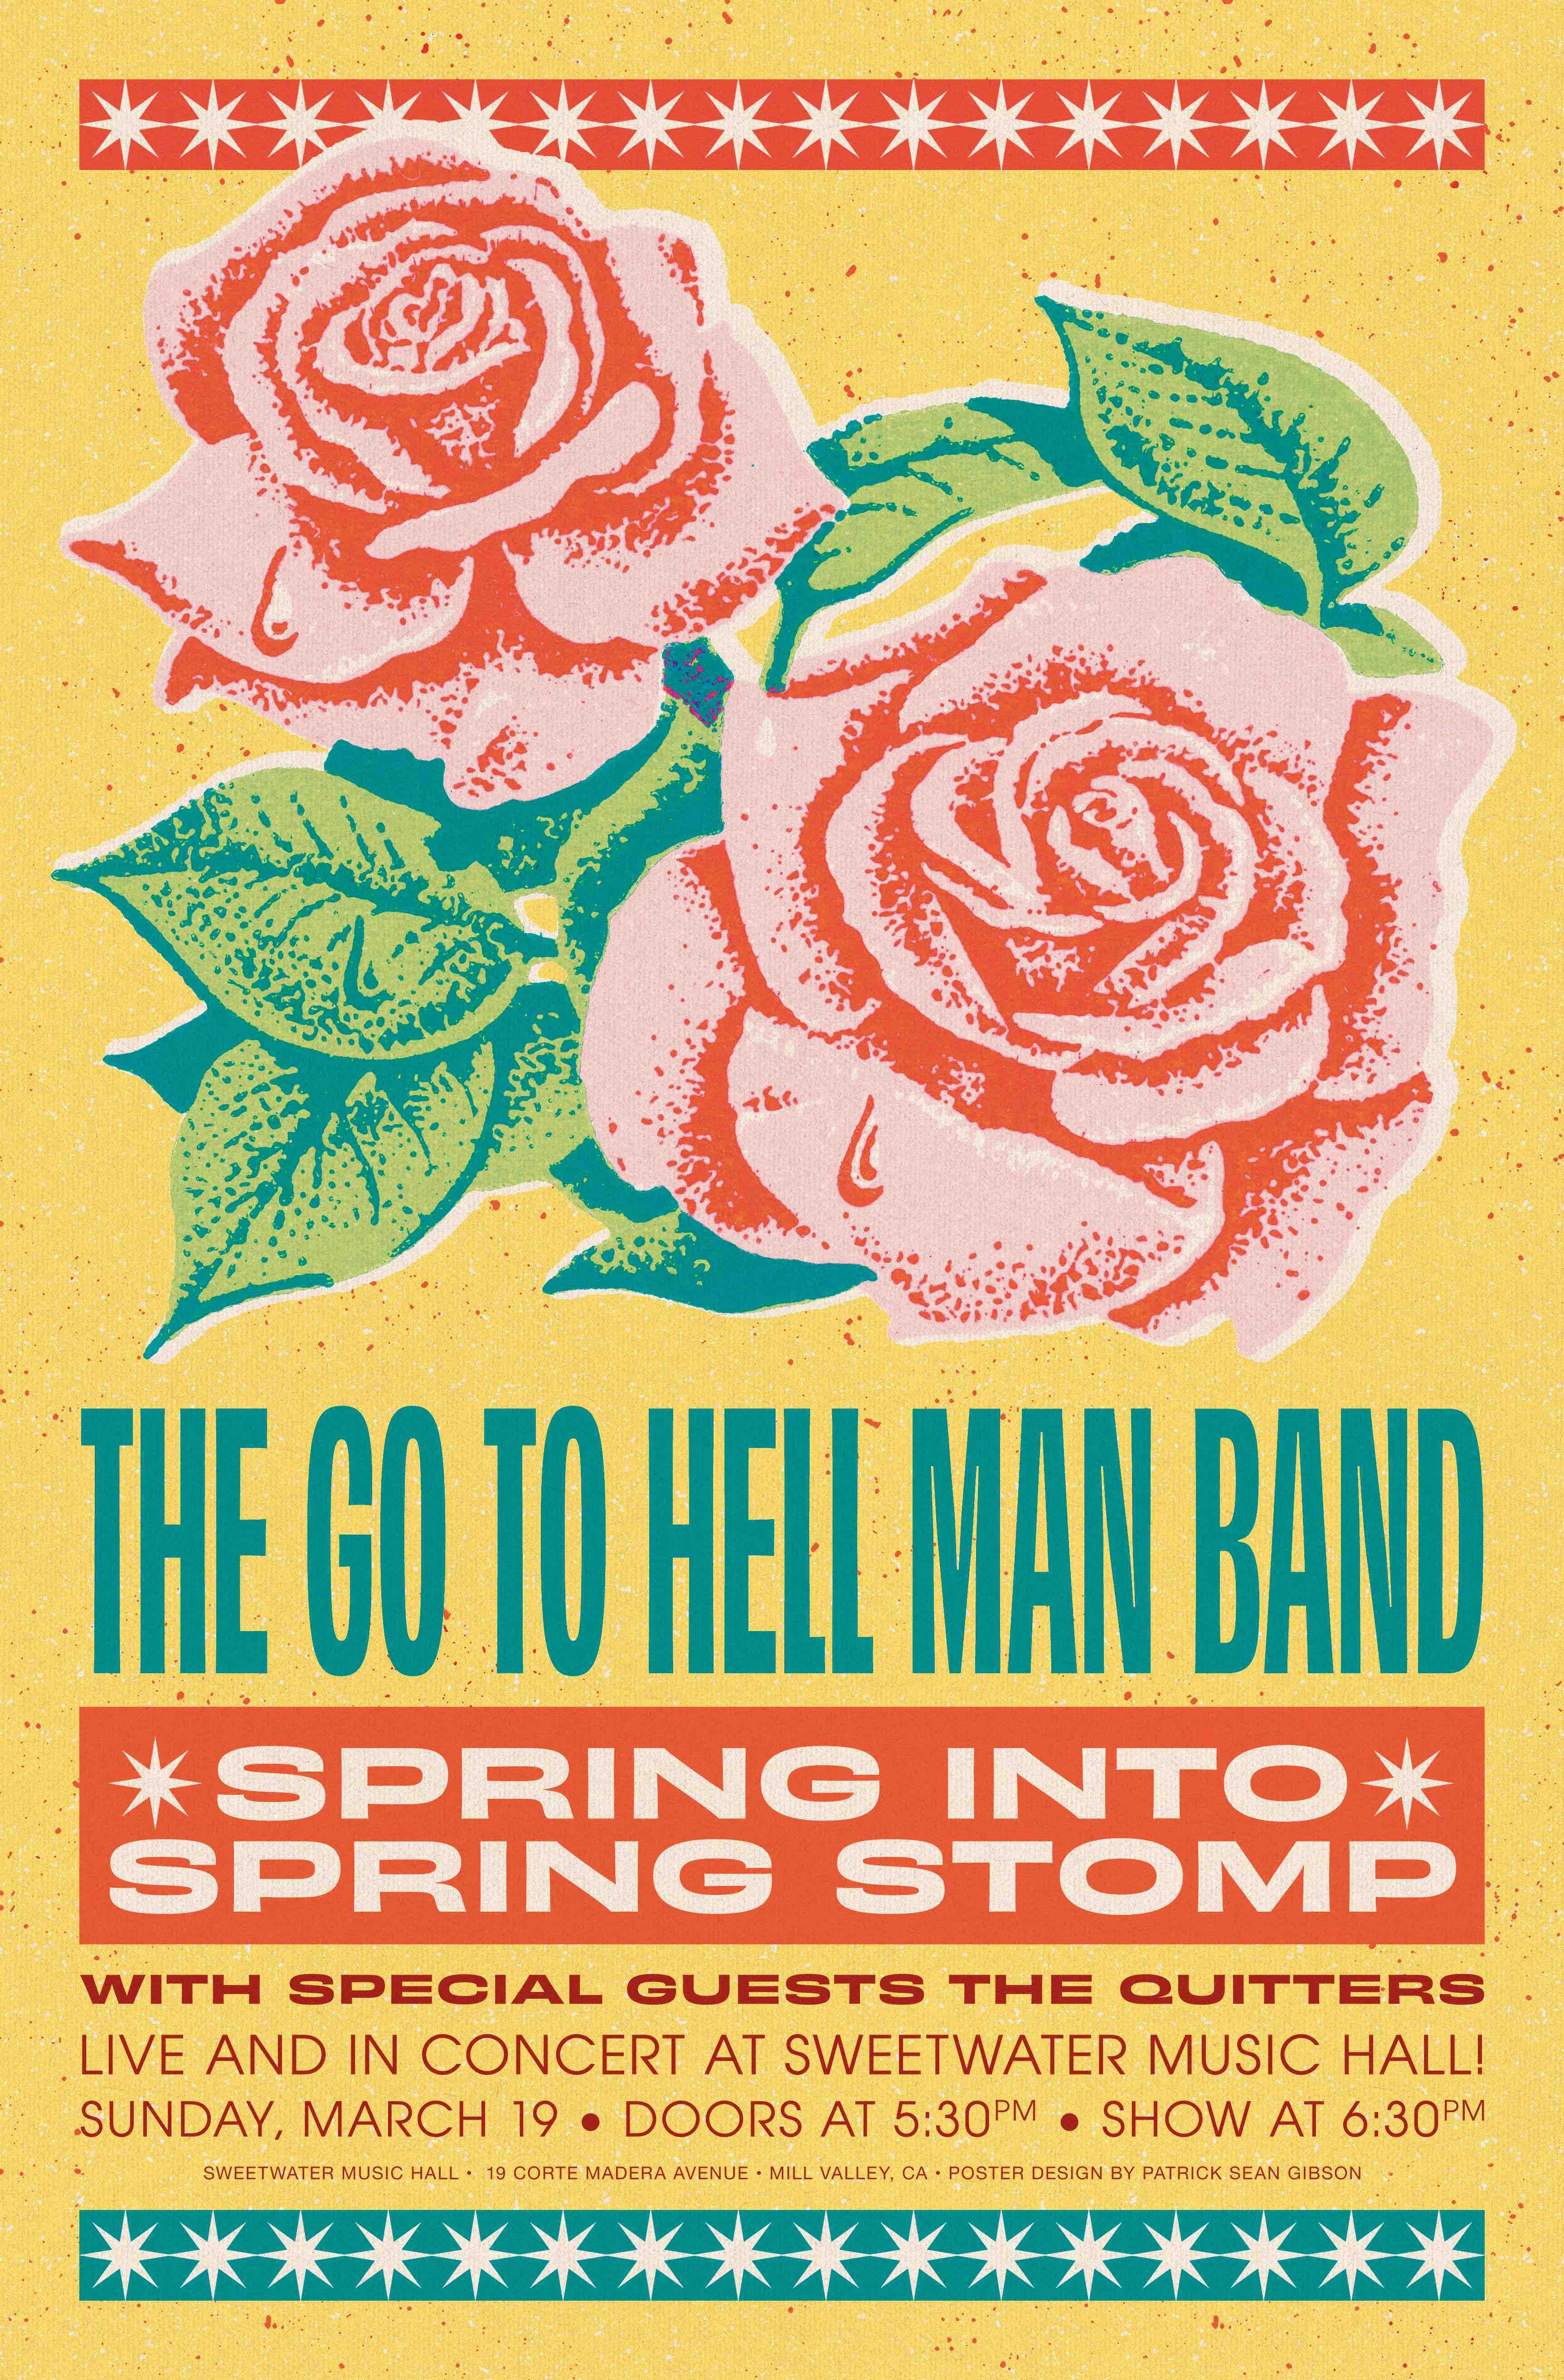 Hellman Spring Stomp brings American roots music to Sweetwater, 3/19